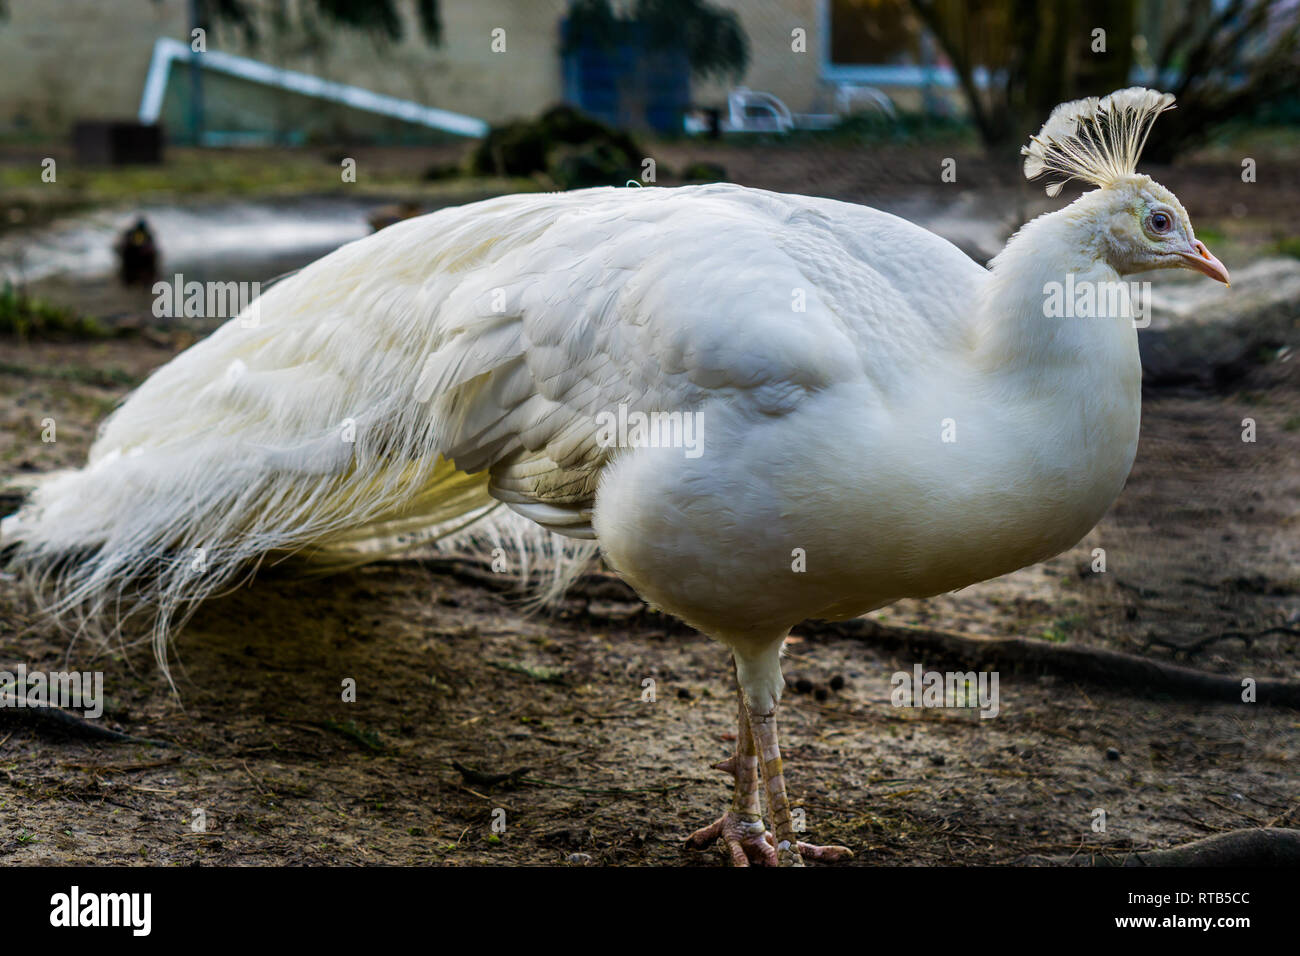 portrait of a beautiful white peacock, popular color mutation in aviculture, tropical bird from Asia Stock Photo